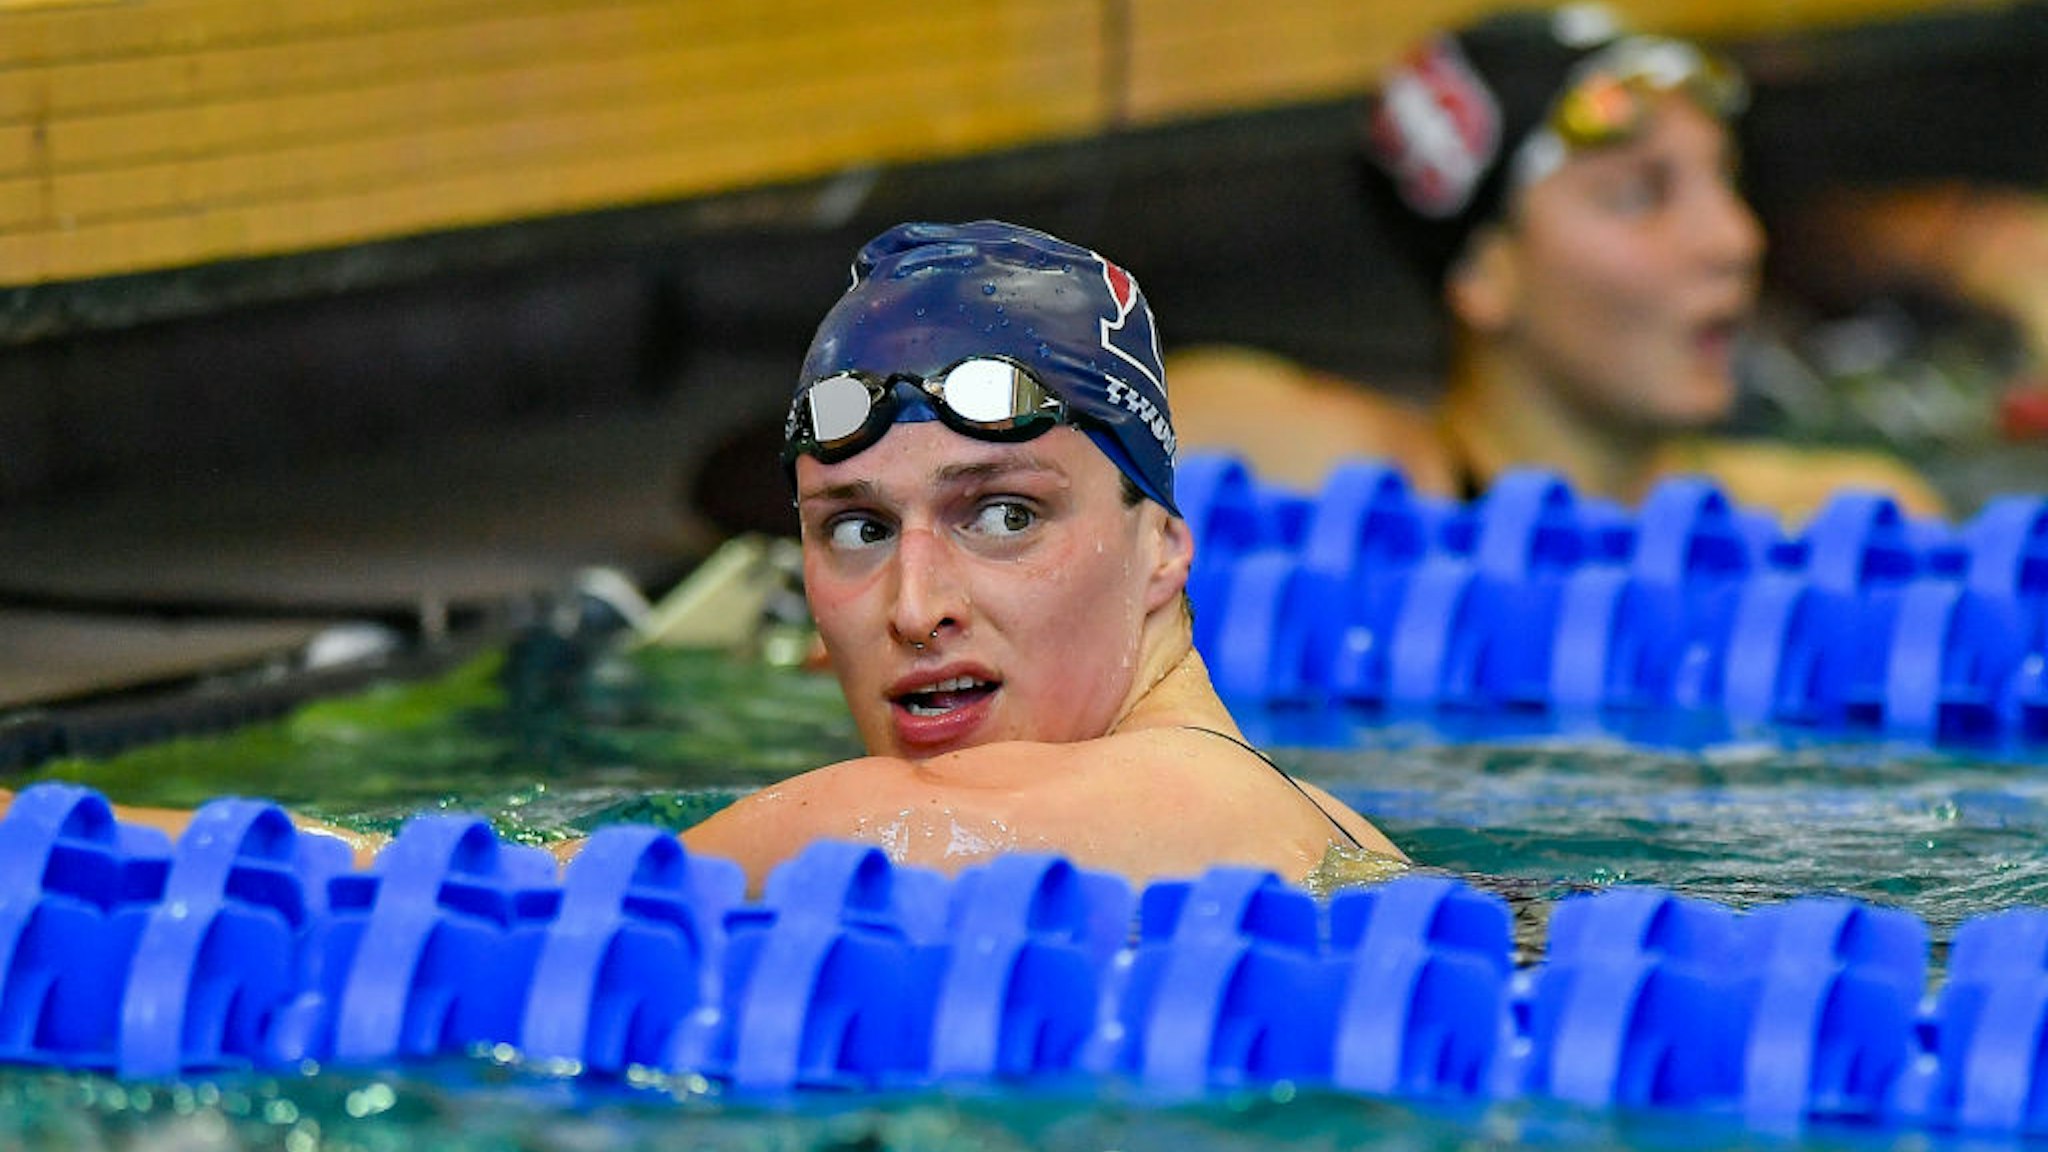 ATLANTA, GA - MARCH 17: University of Pennsylvania swimmer Lia Thomas reacts after winning the 500 Freestyle prelims during the NCAA Swimming and Diving Championships on March 17th, 2022 at the McAuley Aquatic Center in Atlanta Georgia. (Photo by Rich von Biberstein/Icon Sportswire via Getty Images)